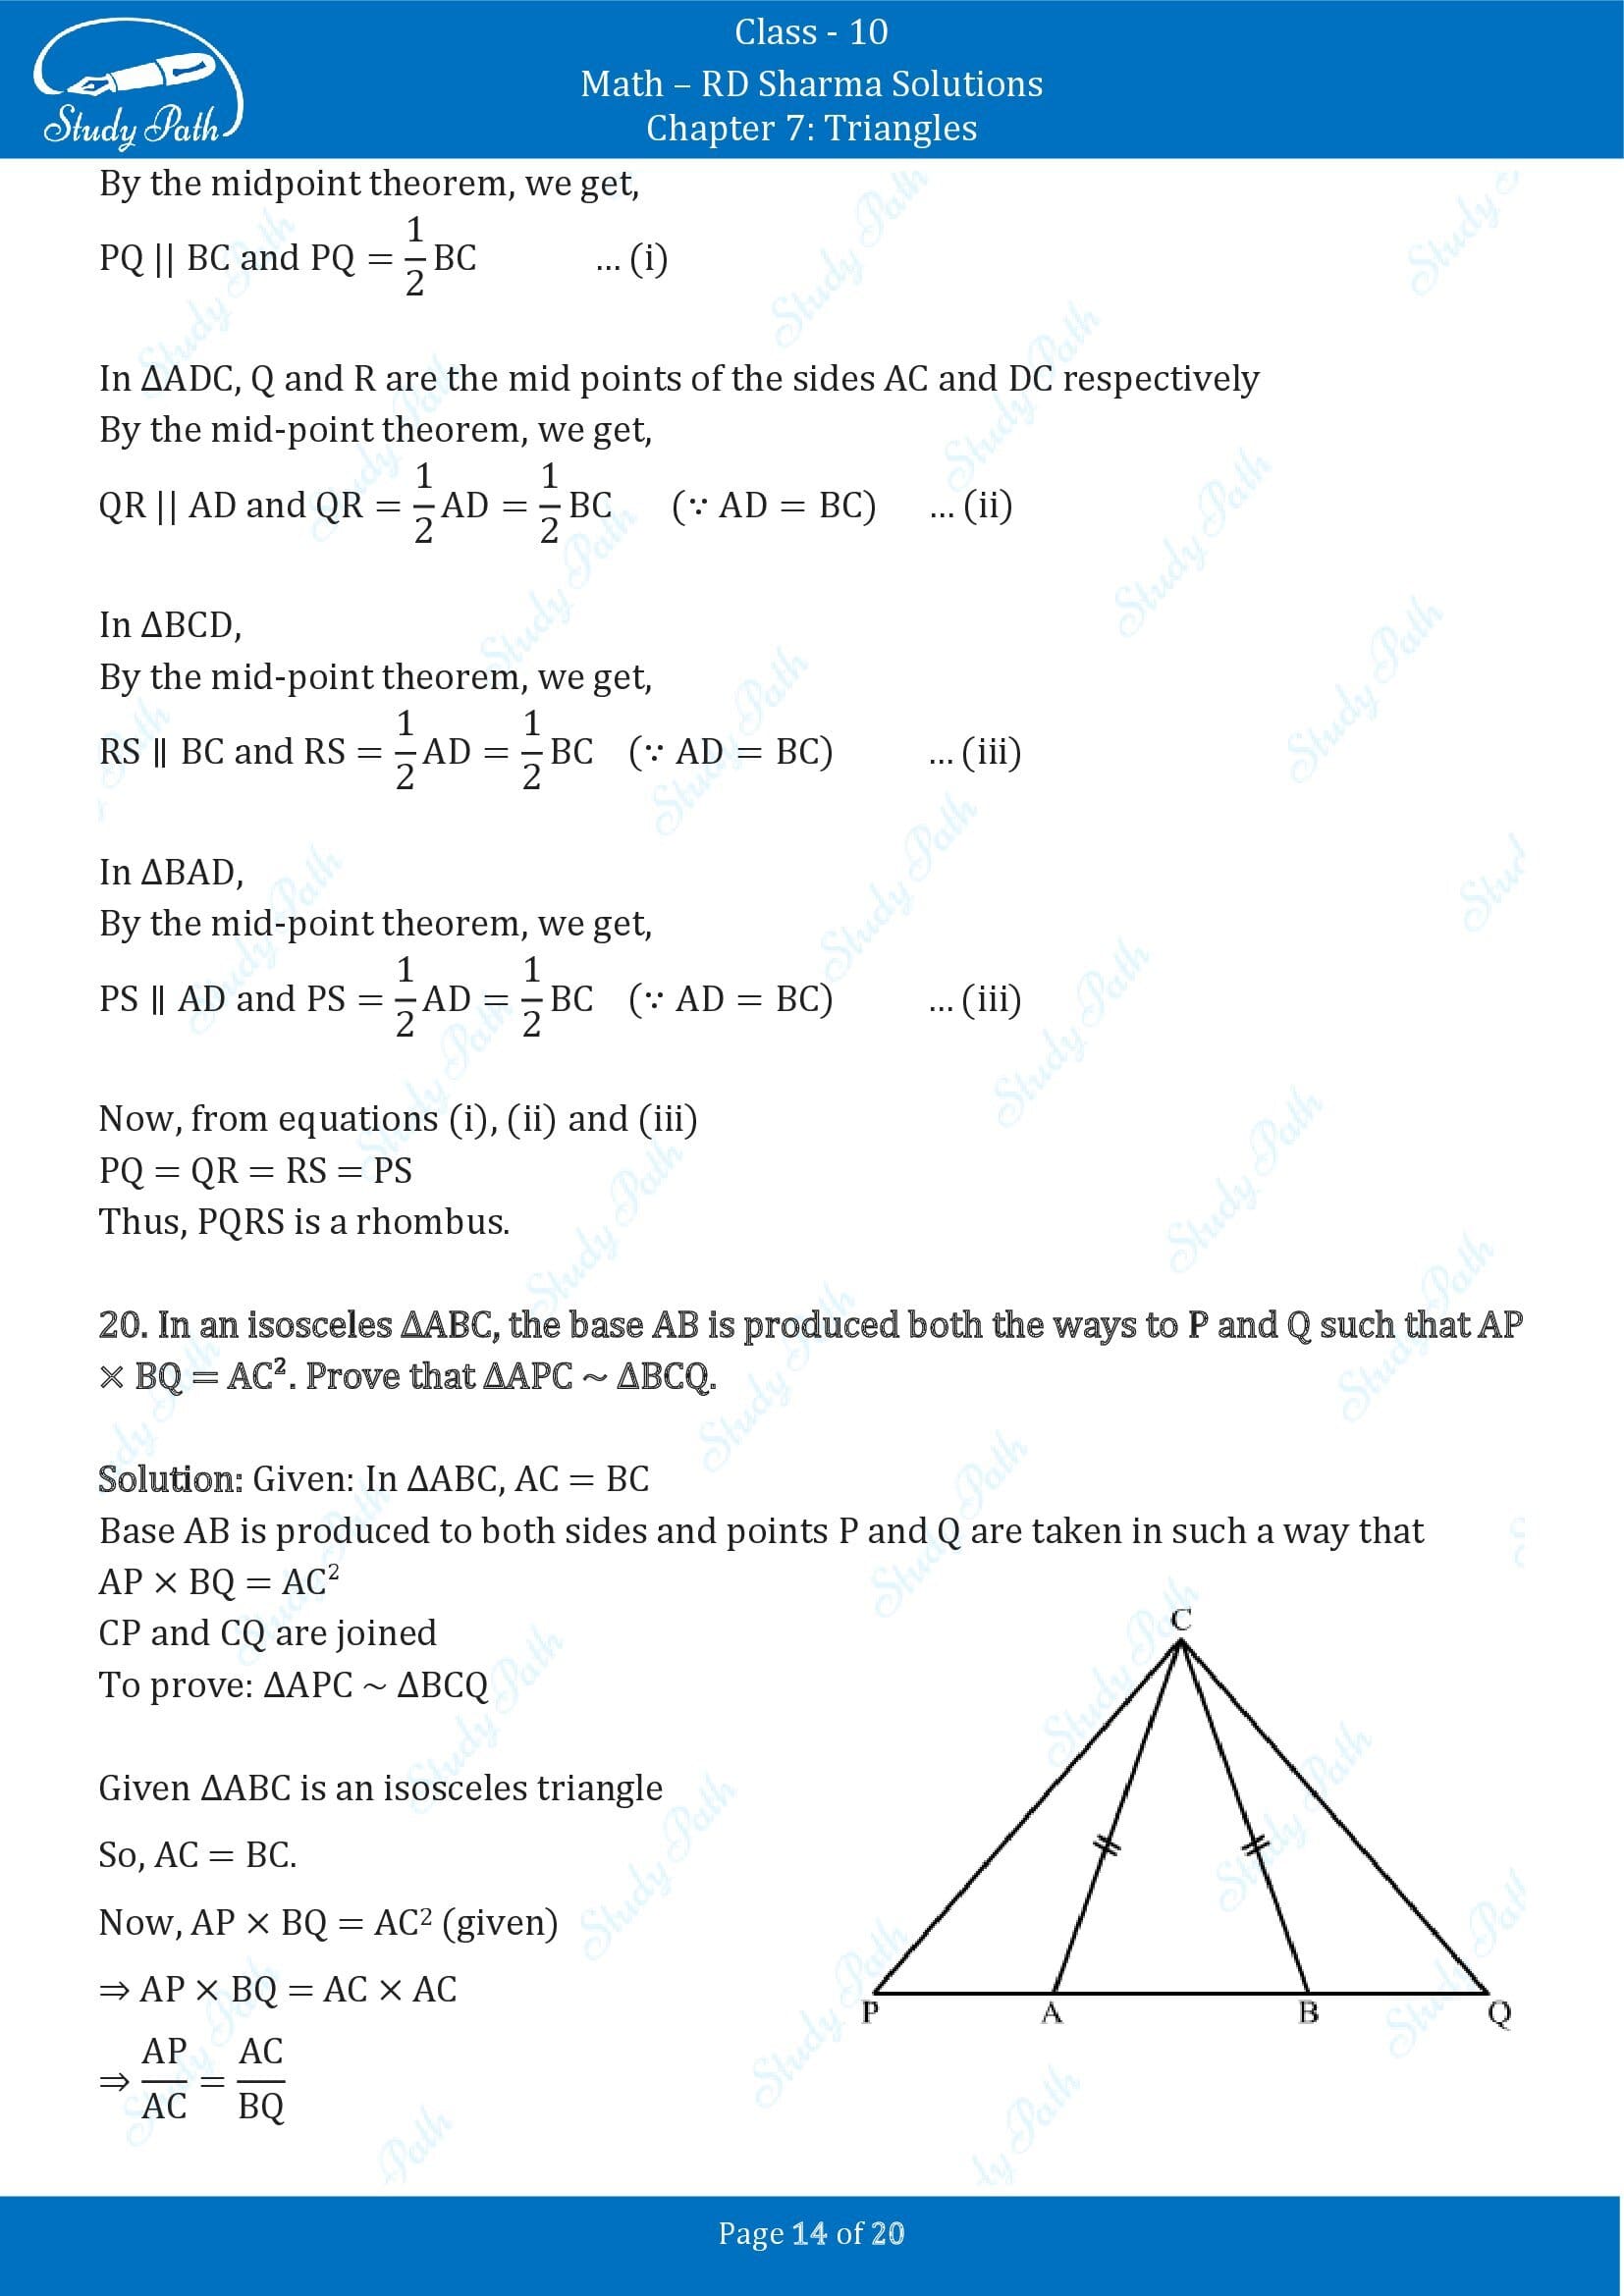 RD Sharma Solutions Class 10 Chapter 7 Triangles Exercise 7.5 00014